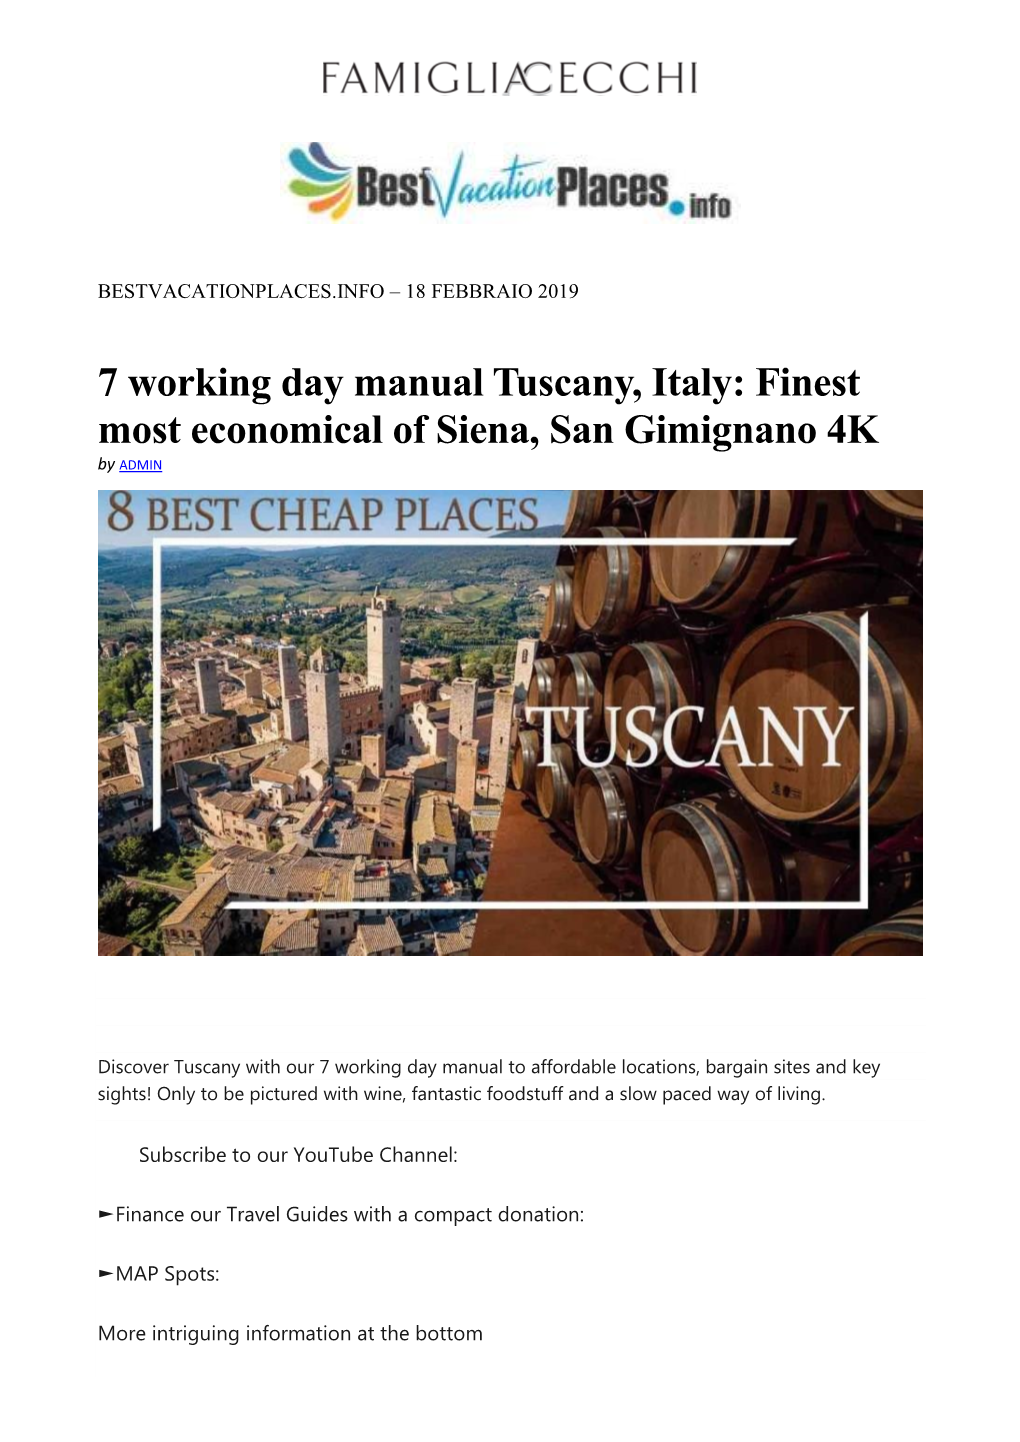 7 Working Day Manual Tuscany, Italy: Finest Most Economical of Siena, San Gimignano 4K by ADMIN